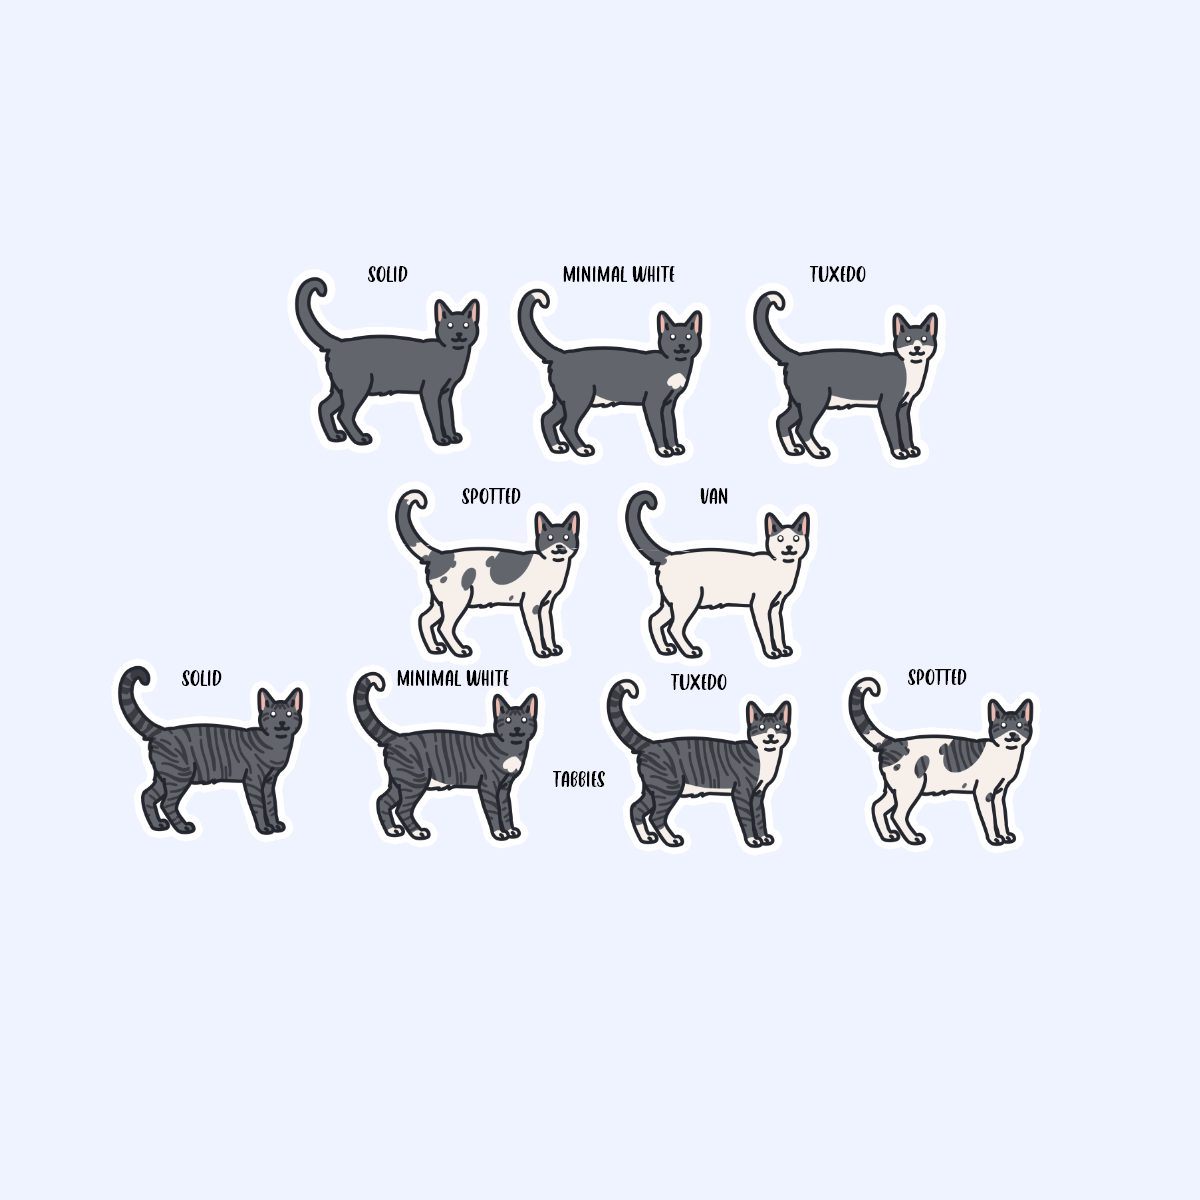 Grey/Gray Shorthair Cats - 3" Solid and Tabby Cats